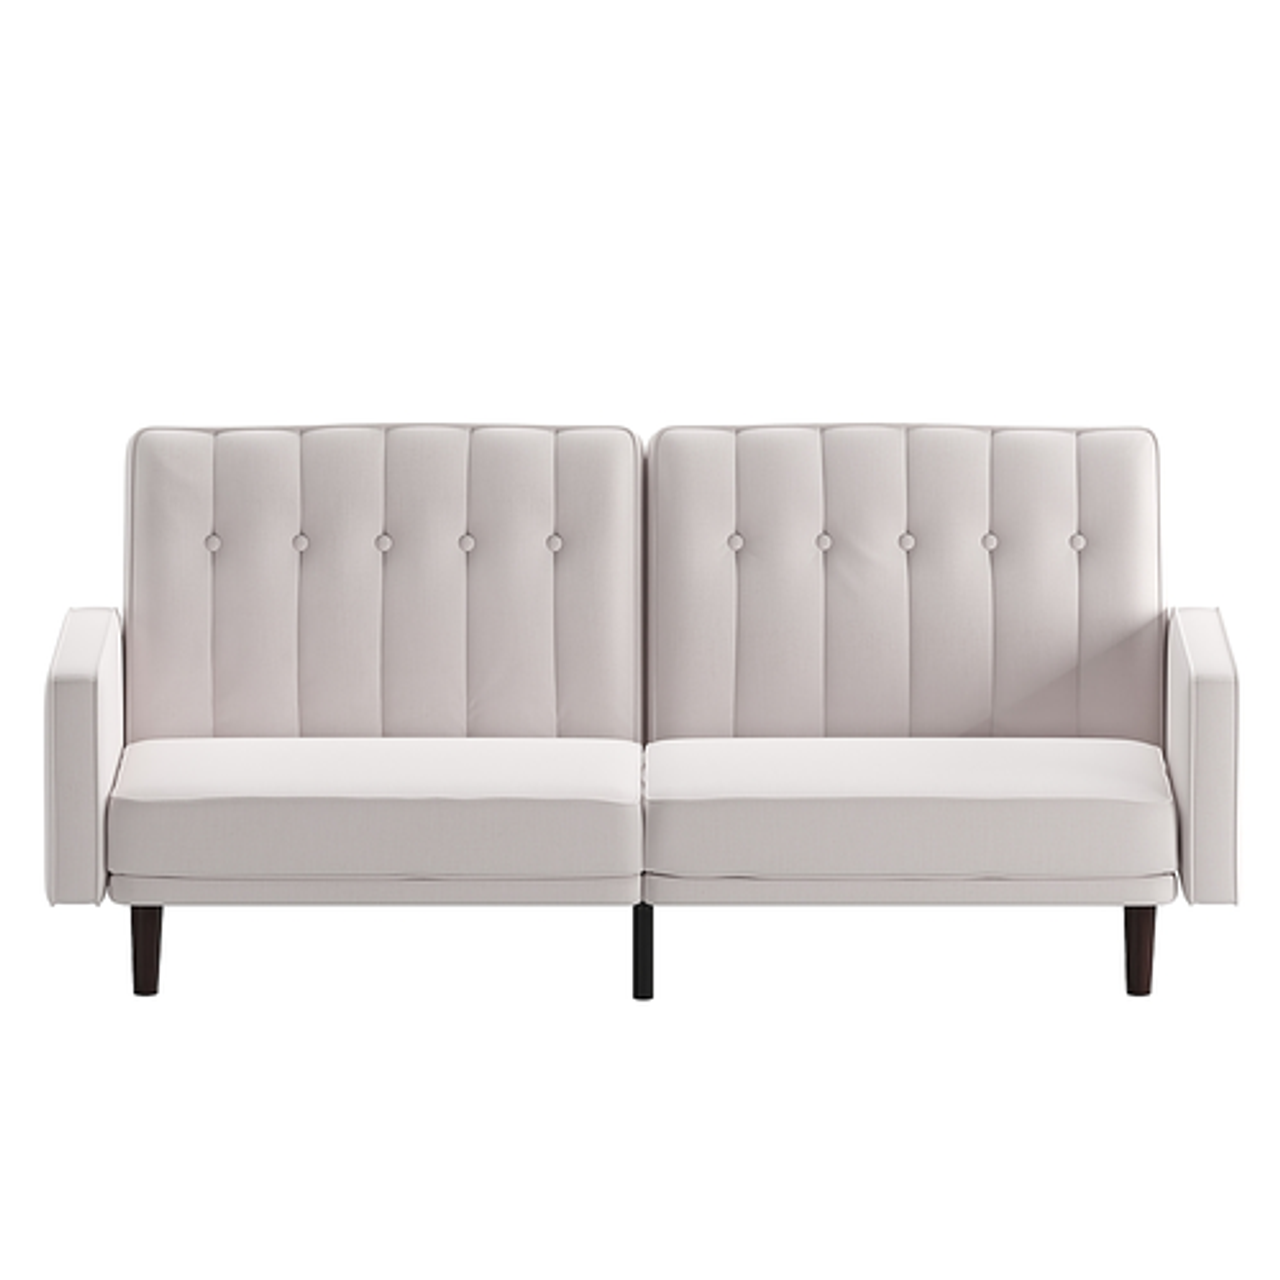 Flash Furniture - Carter Convertible Split Back Tufted Futon Sofa with Wooden Legs in Faux Linen - Stone